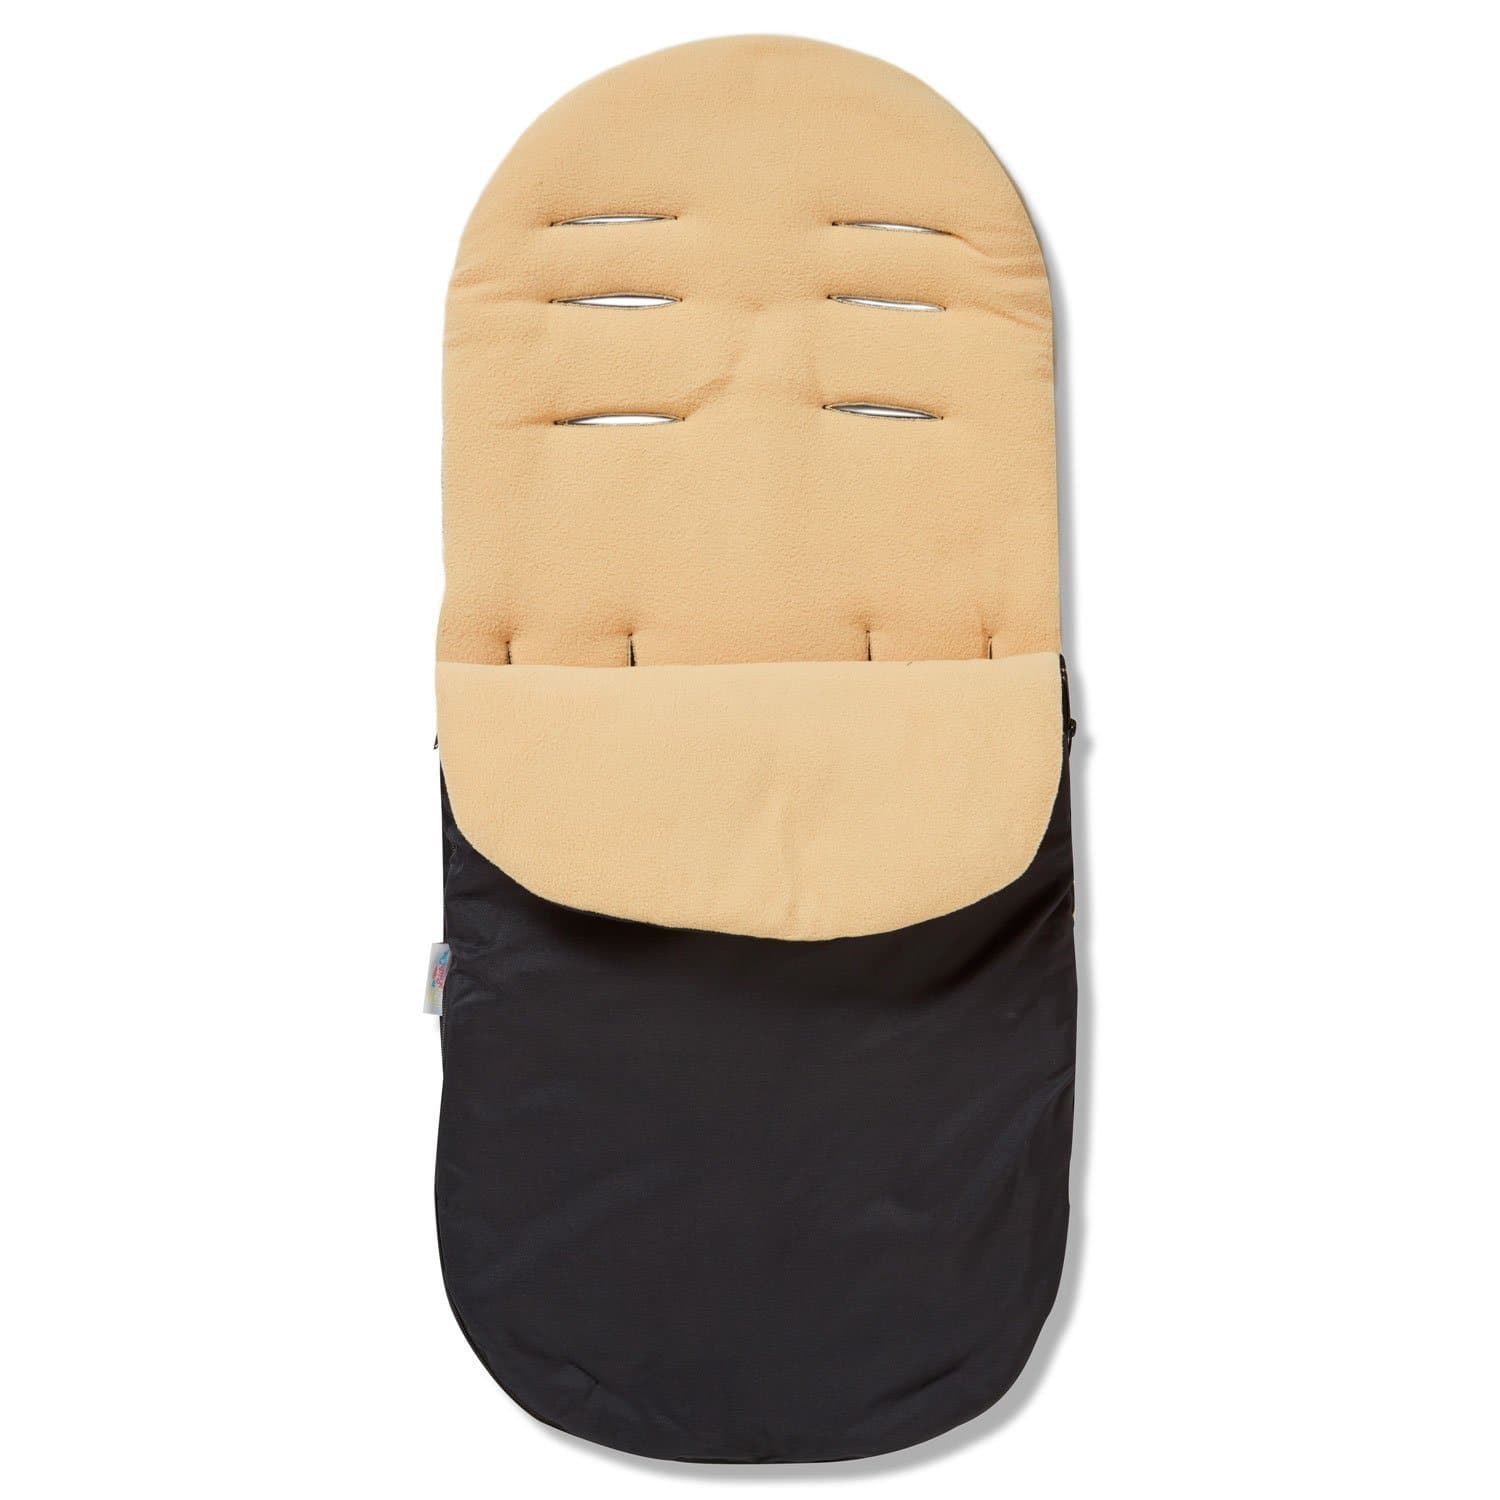 Footmuff / Cosy Toes Compatible with Esprit - For Your Little One